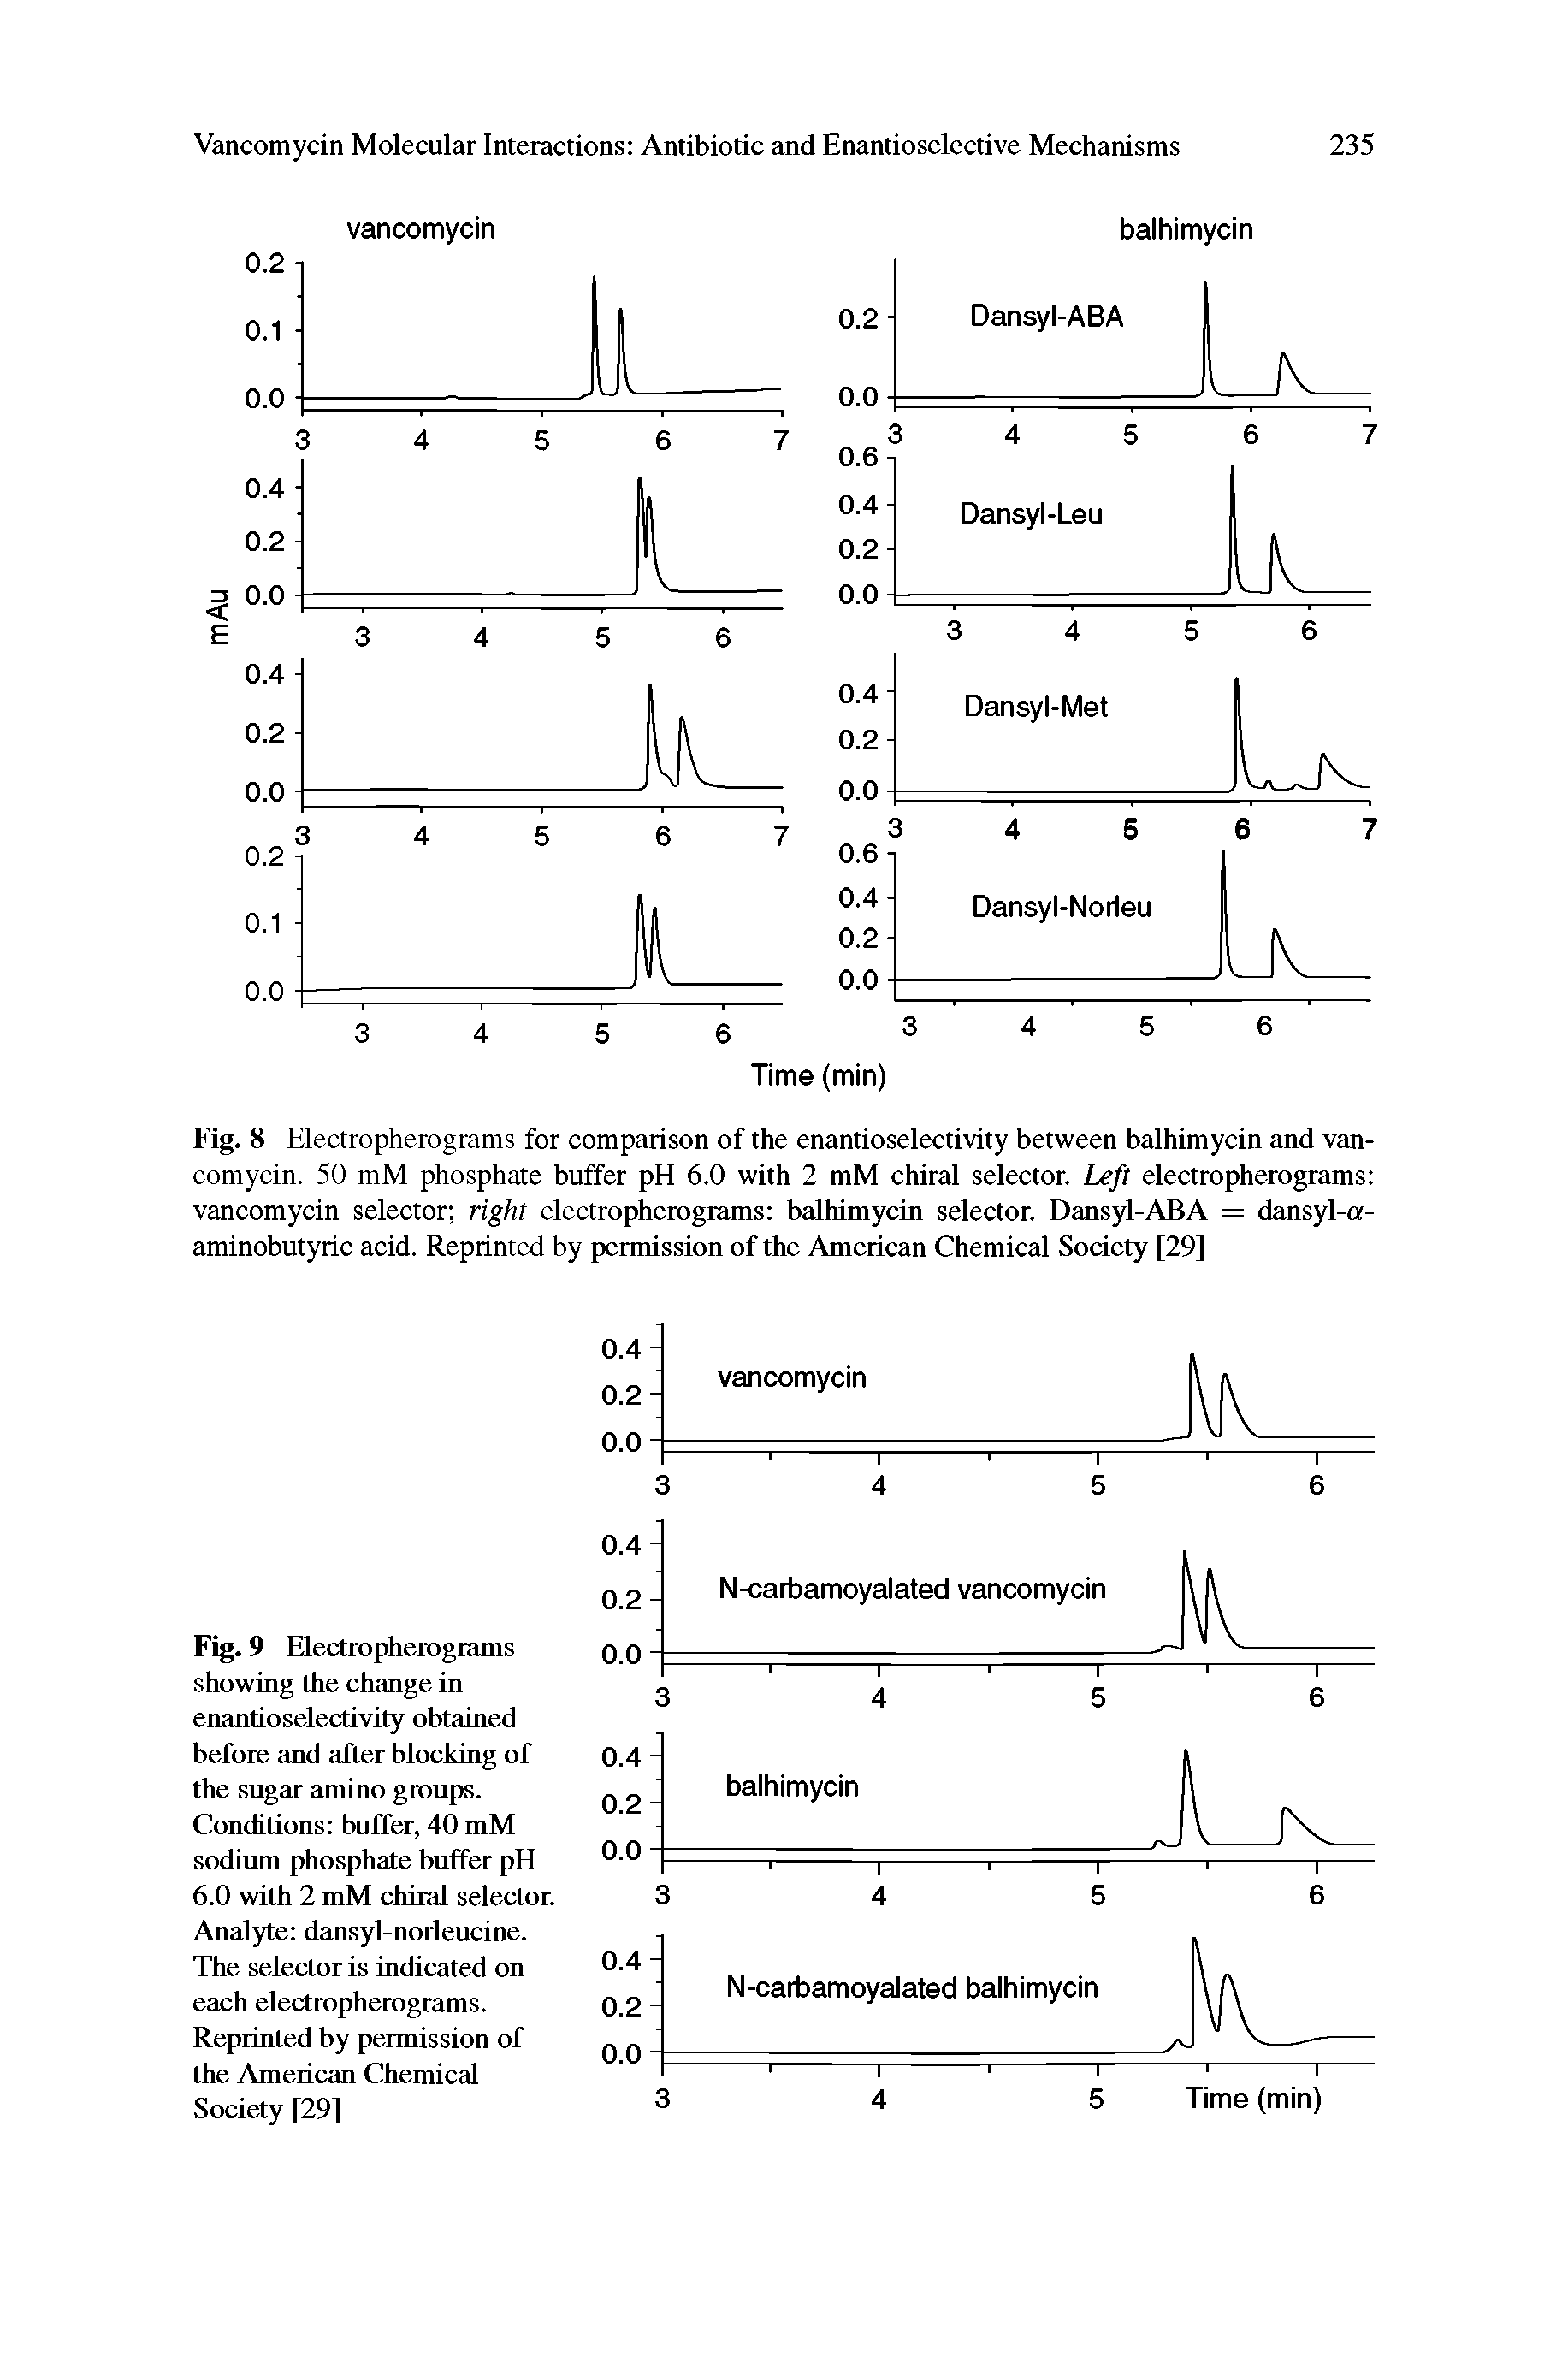 Fig. 9 Electropherograms showing the change in enantioselectivity obtained before and after blocking of the sugar amino groups. Conditions buffer, 40 mM sodium phosphate buffer pH 6.0 with 2 mM chiral selector. Analyte dansyl-norleucine. The selector is indicated on each electropherograms. Reprinted by permission of the American Chemical Society [29]...